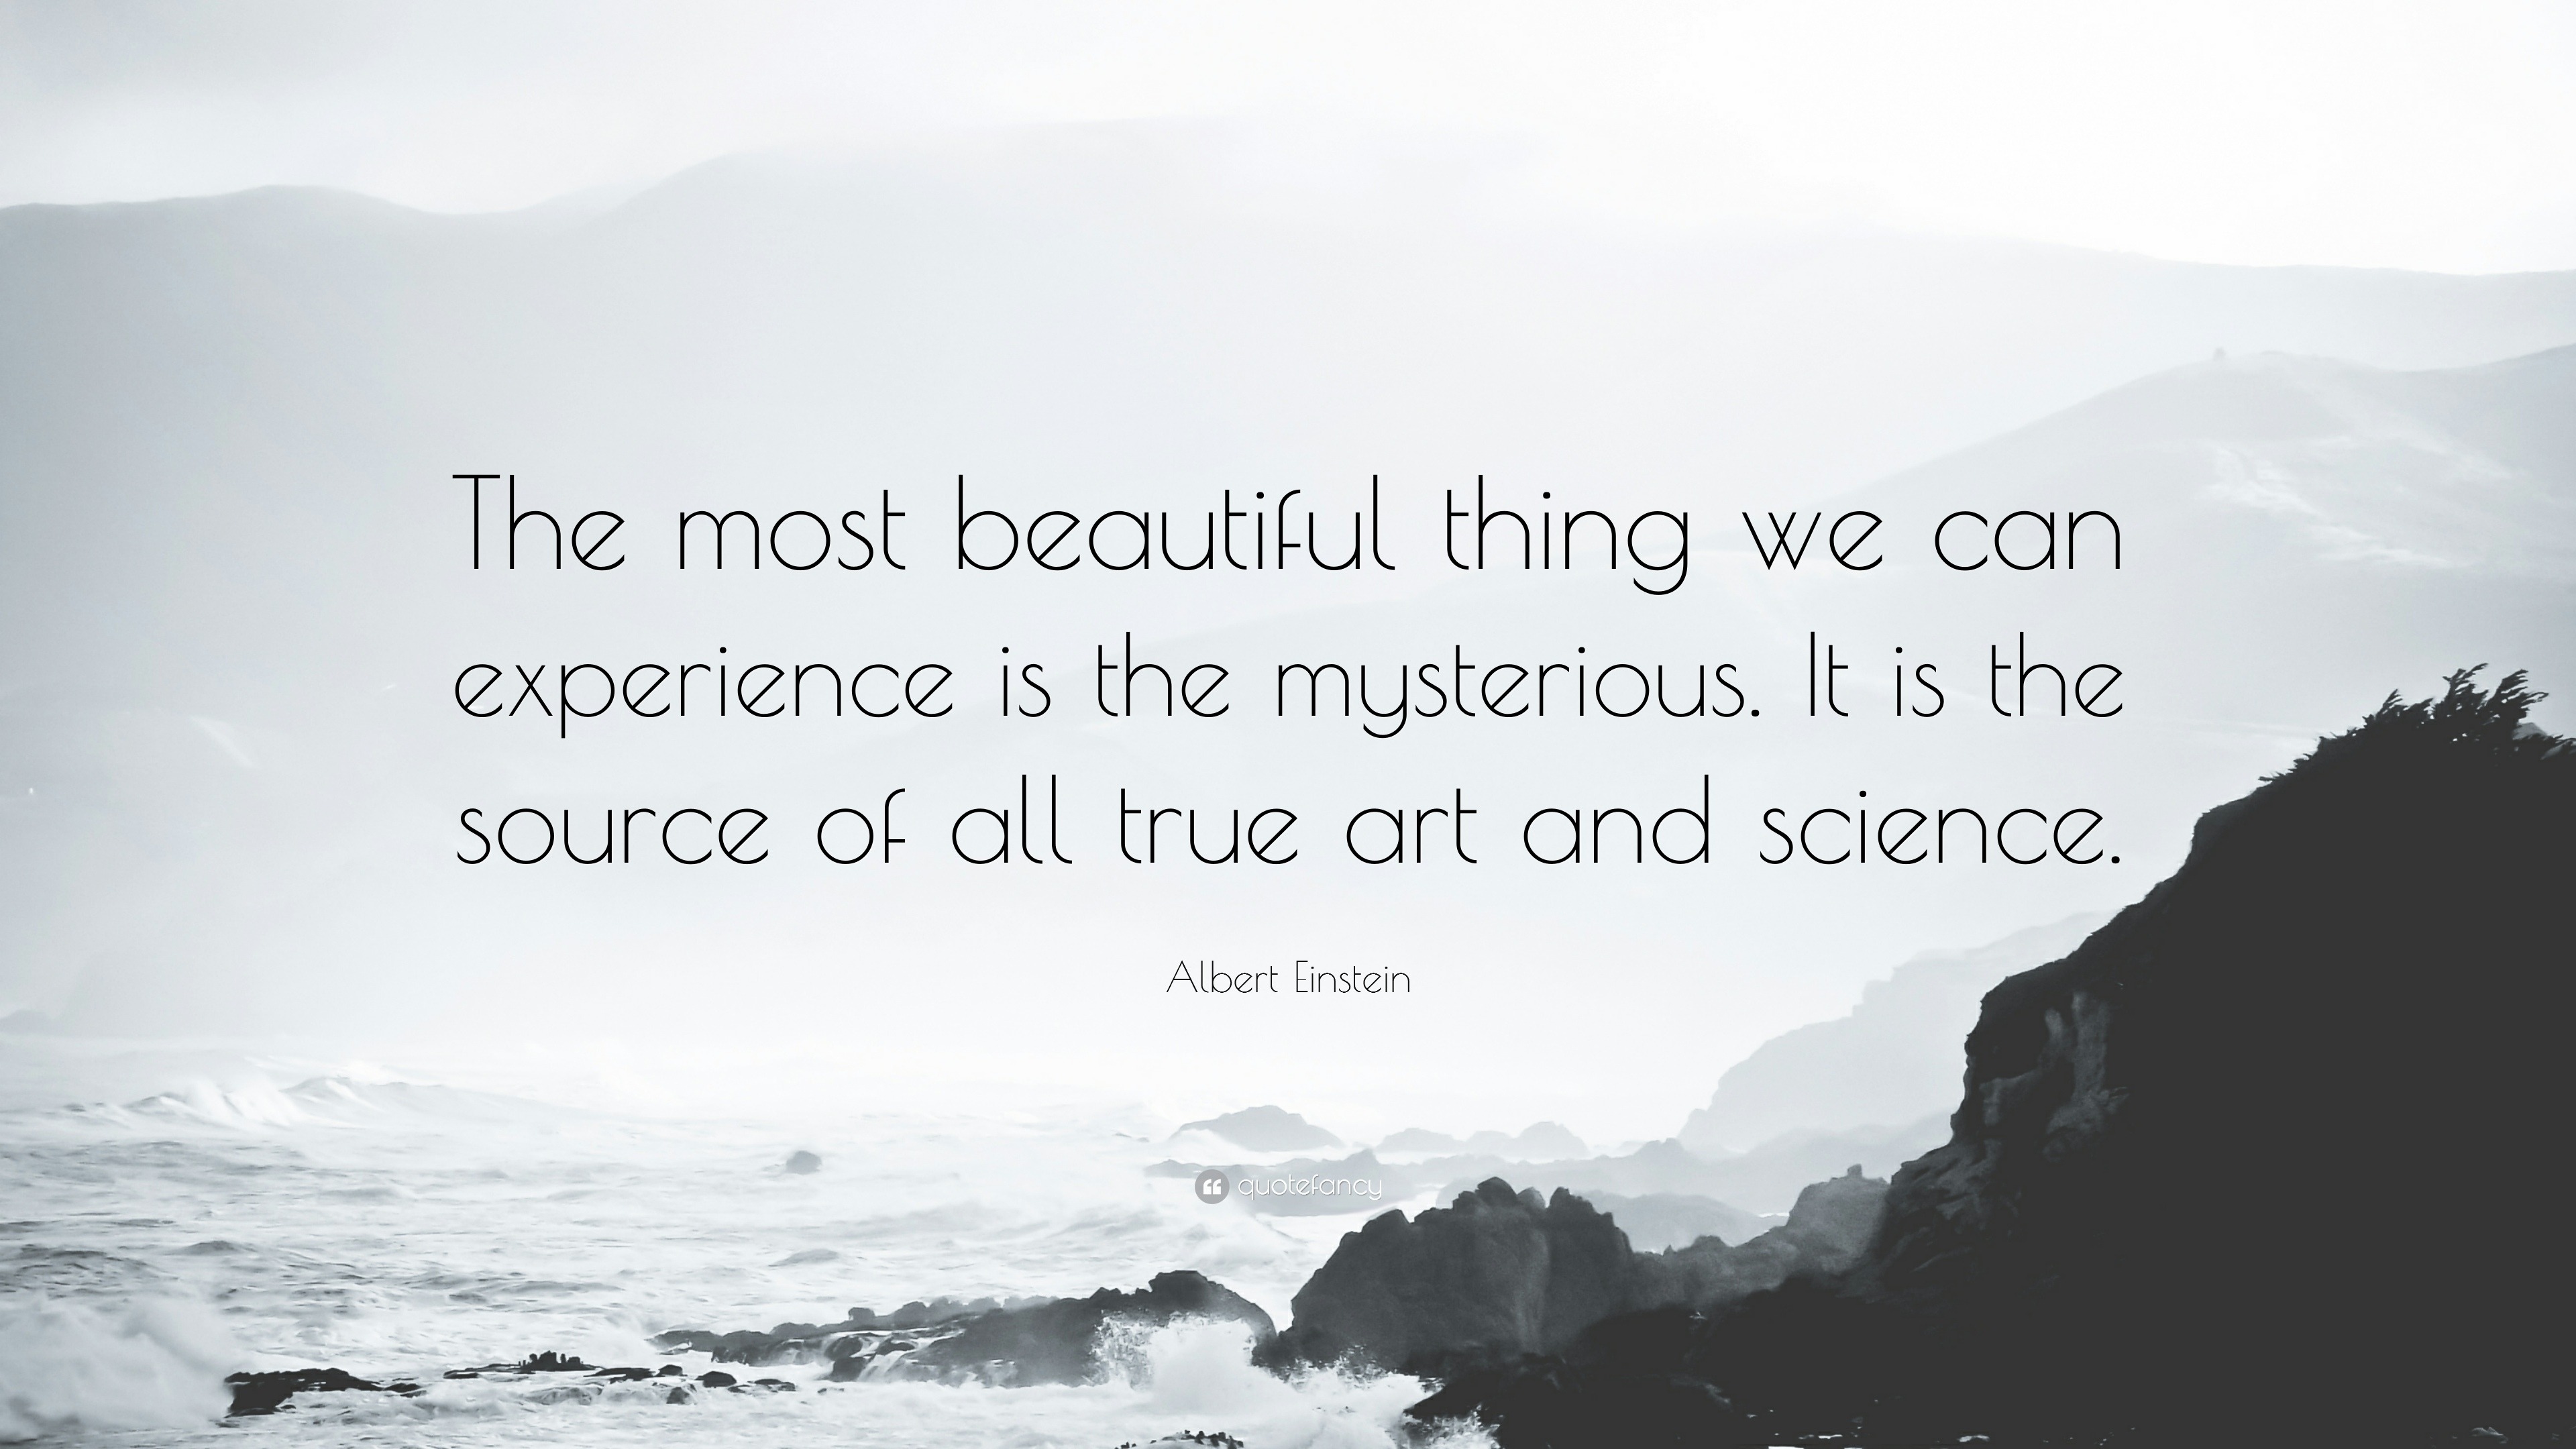 Albert Einstein Quote: “The most beautiful thing we can experience is